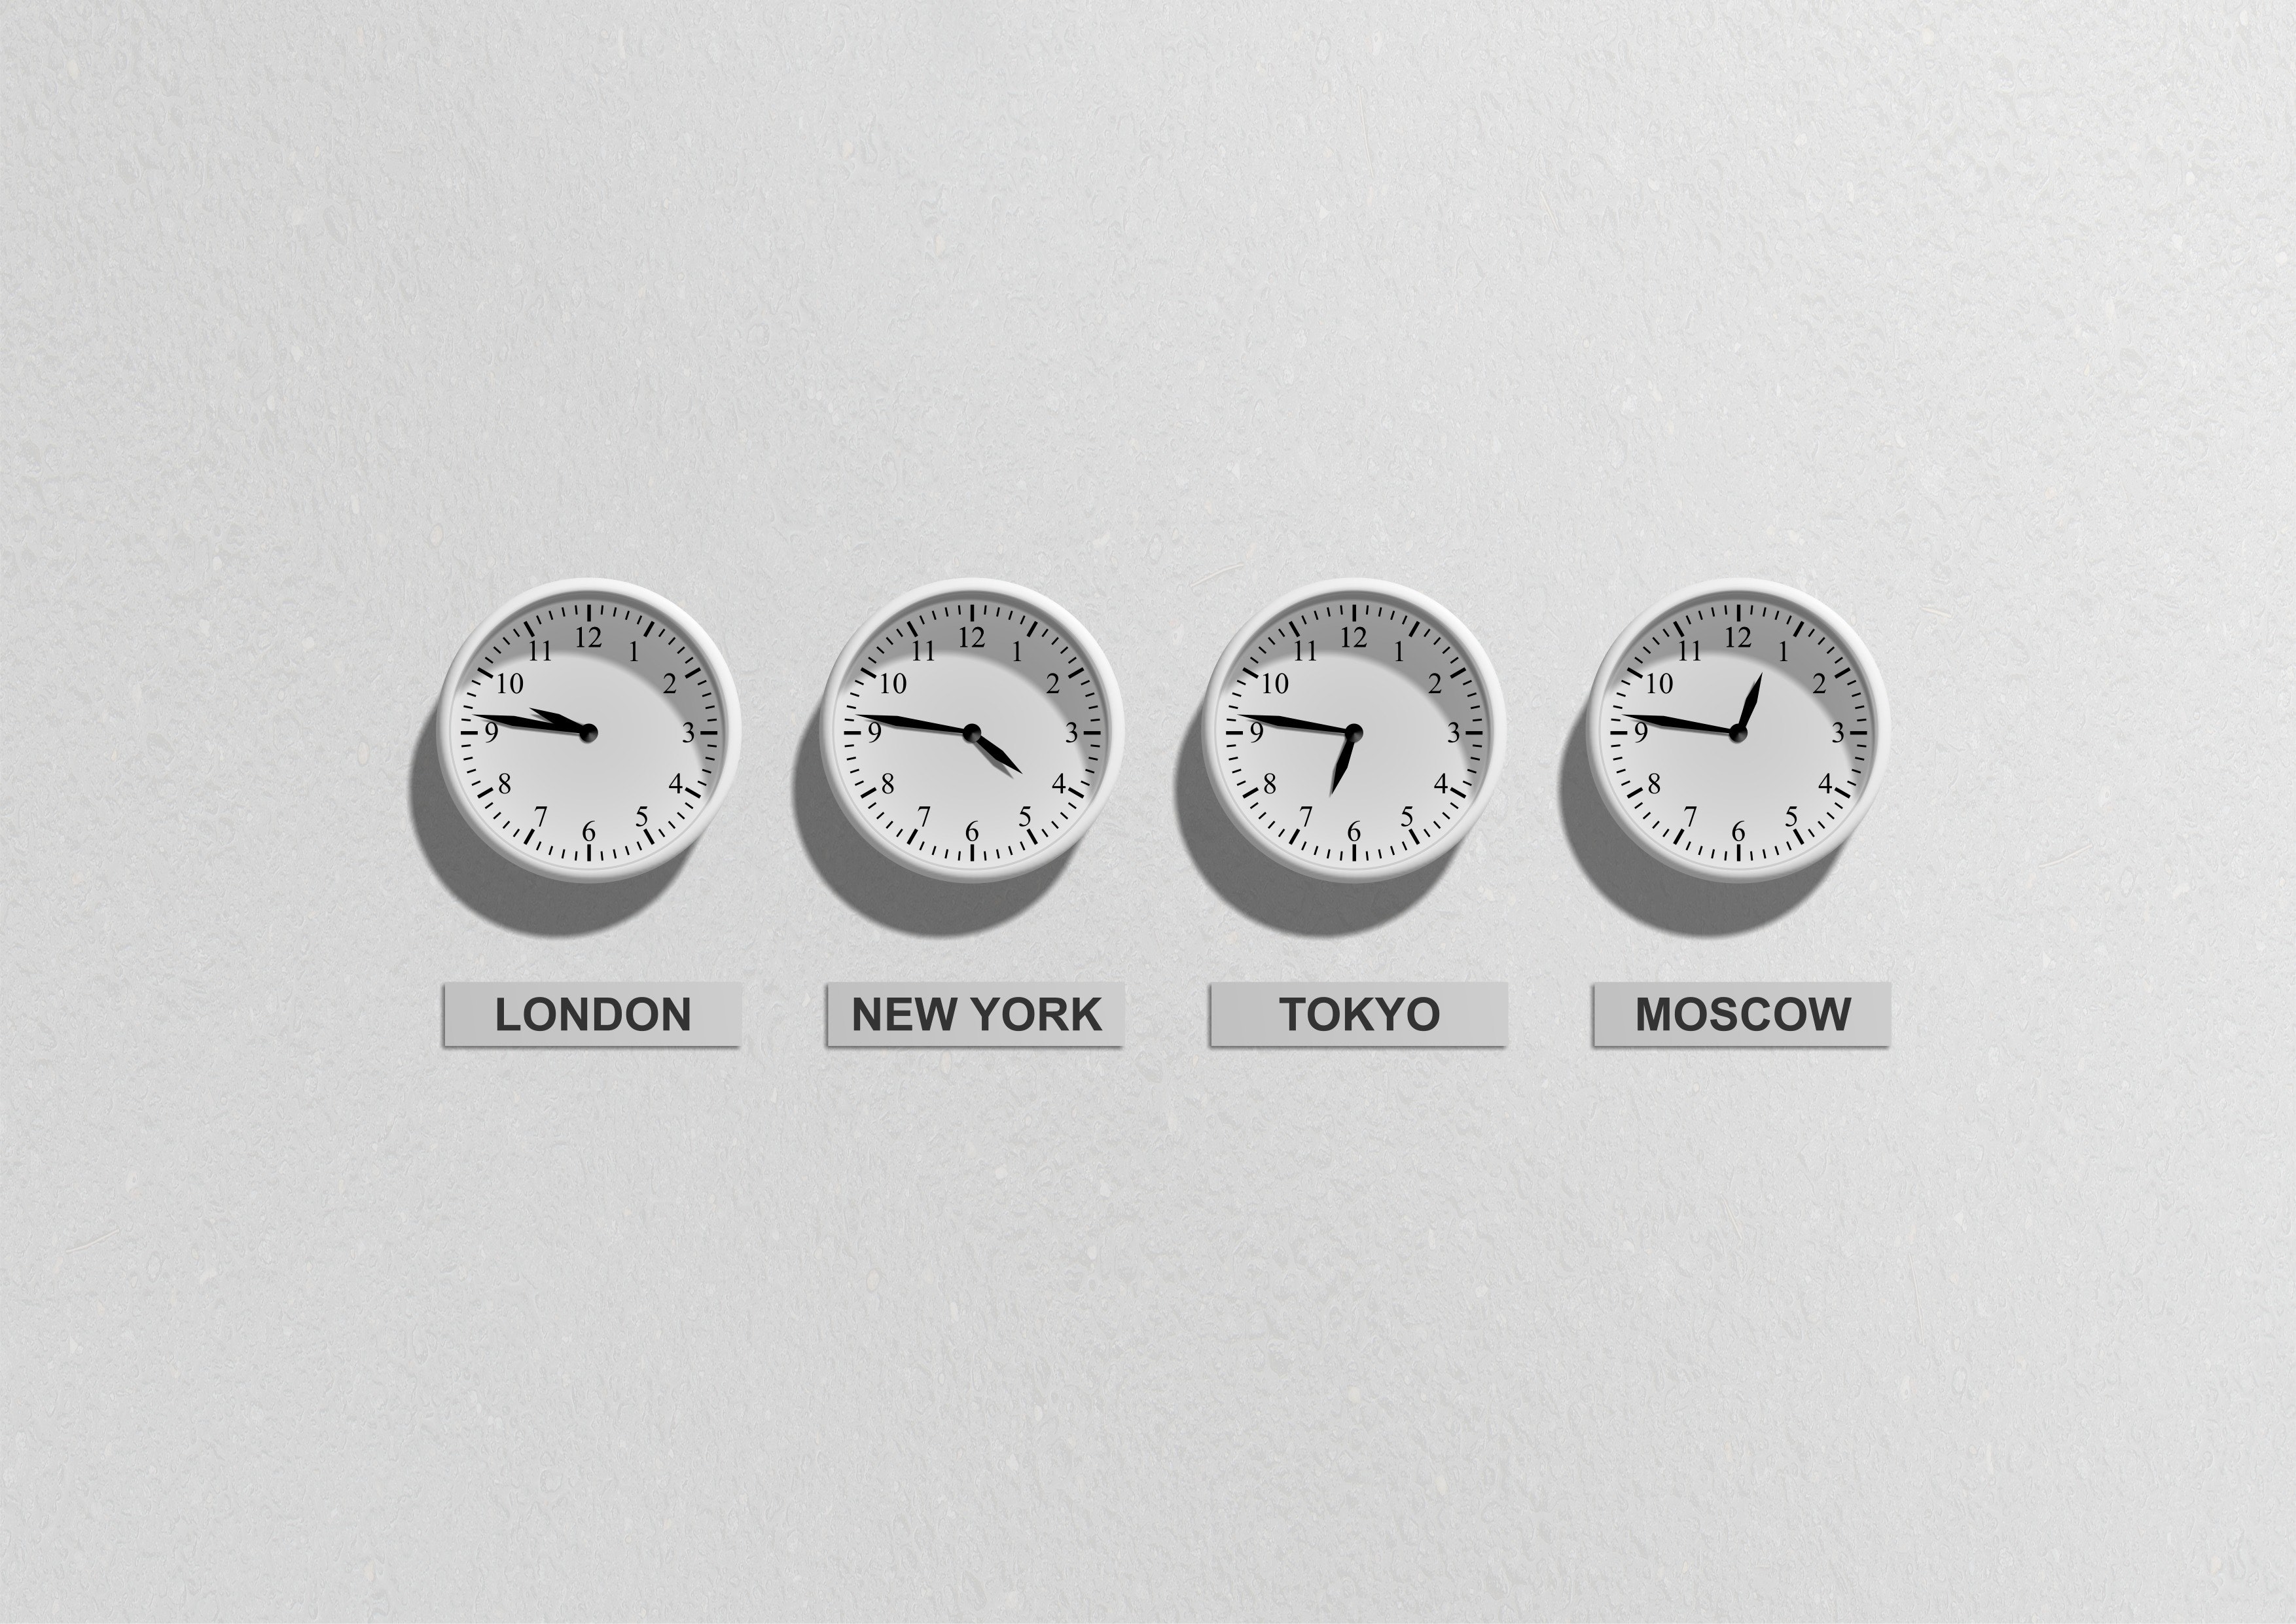 Image of clocks of different parts of the world